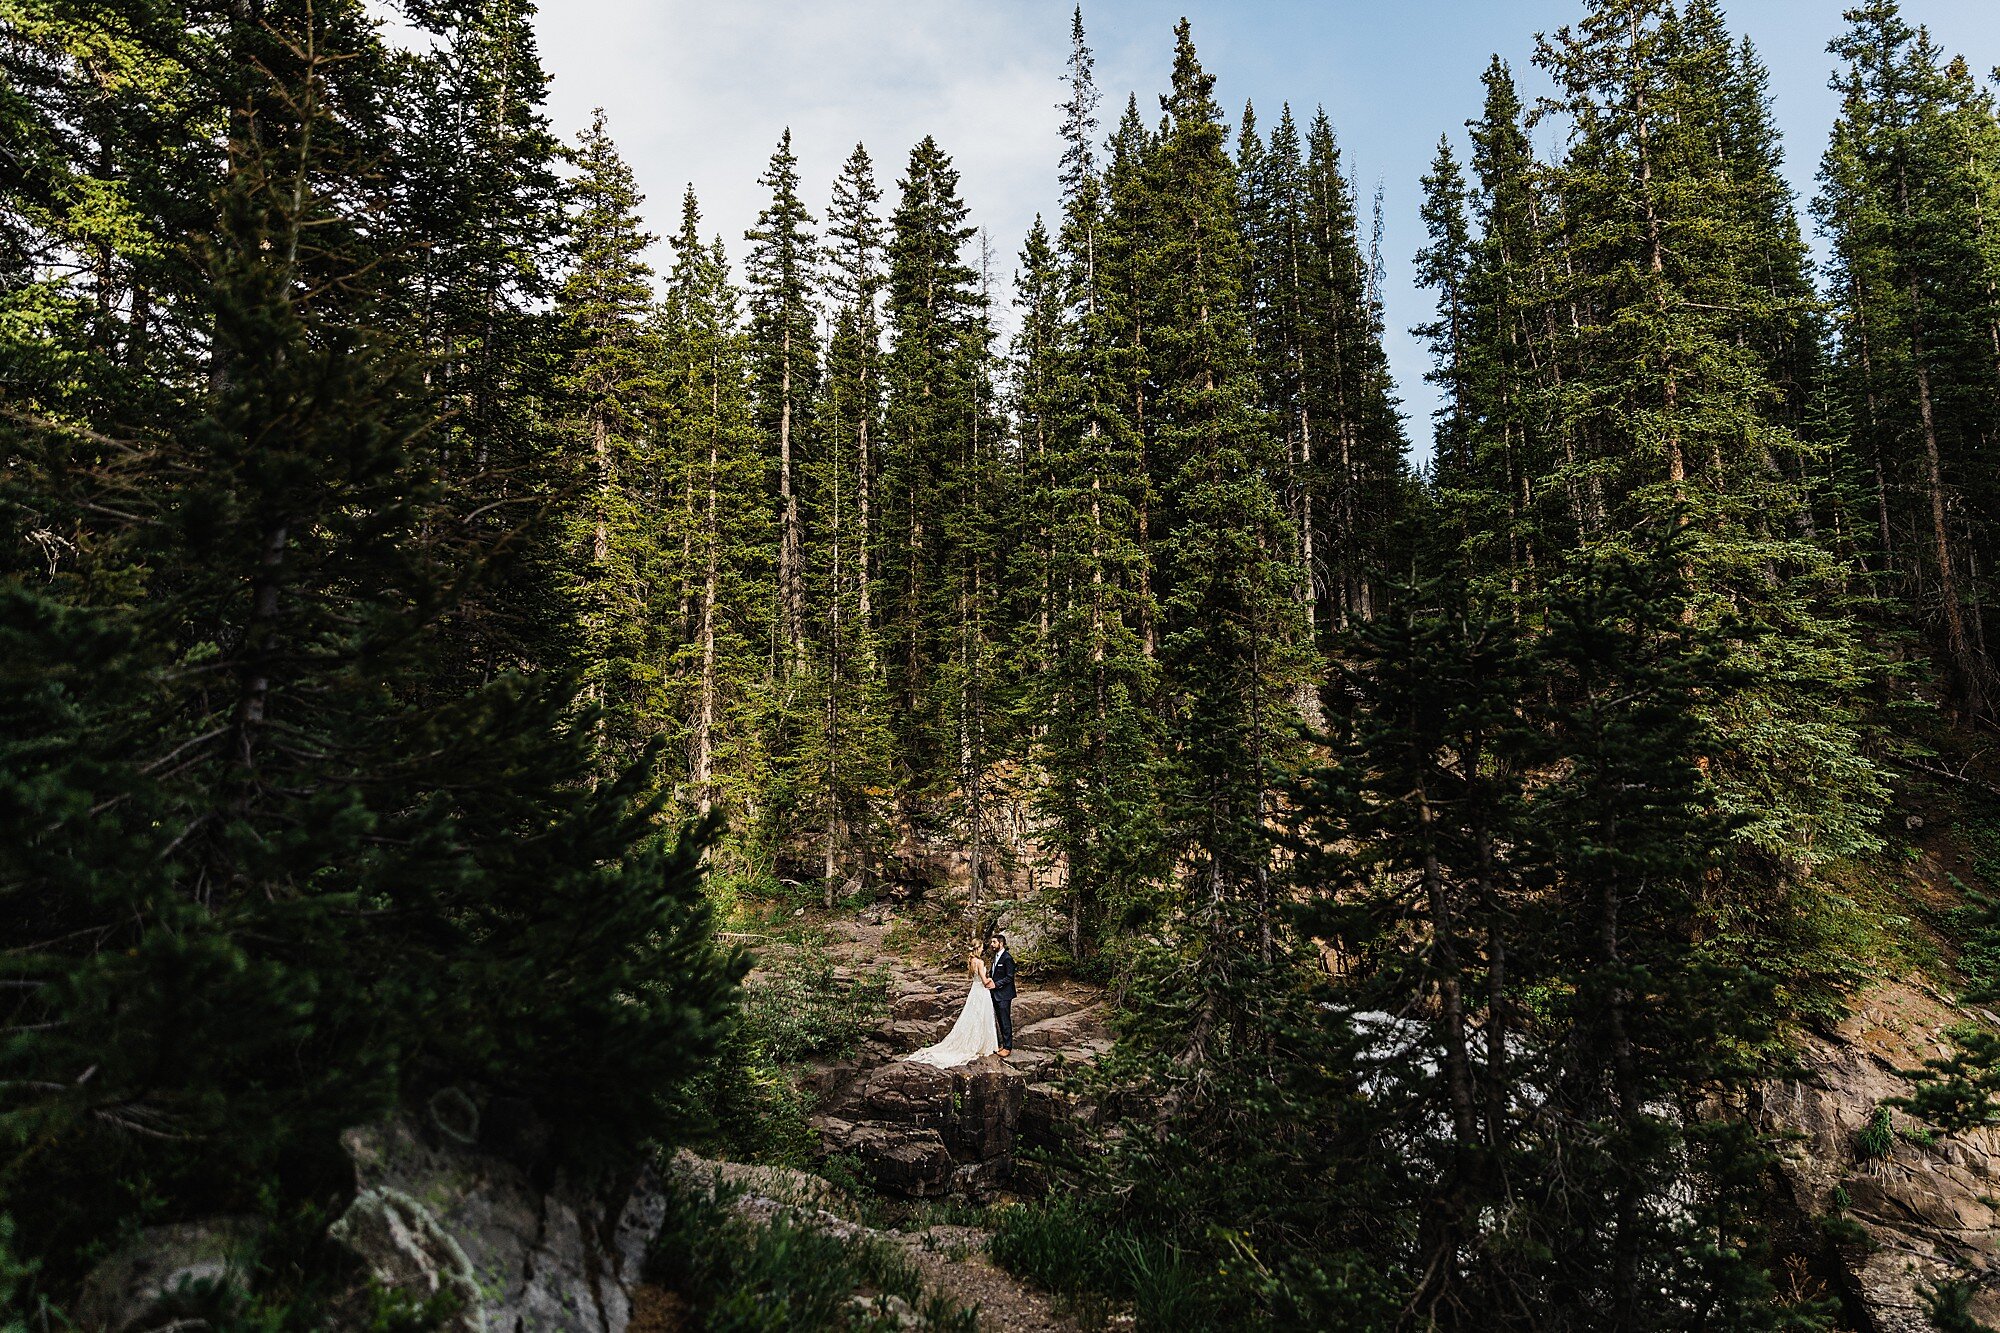 Mountaintop Elopement in Colorado with Wildflowers | Crested Butte Elopement | Vow of the Wild